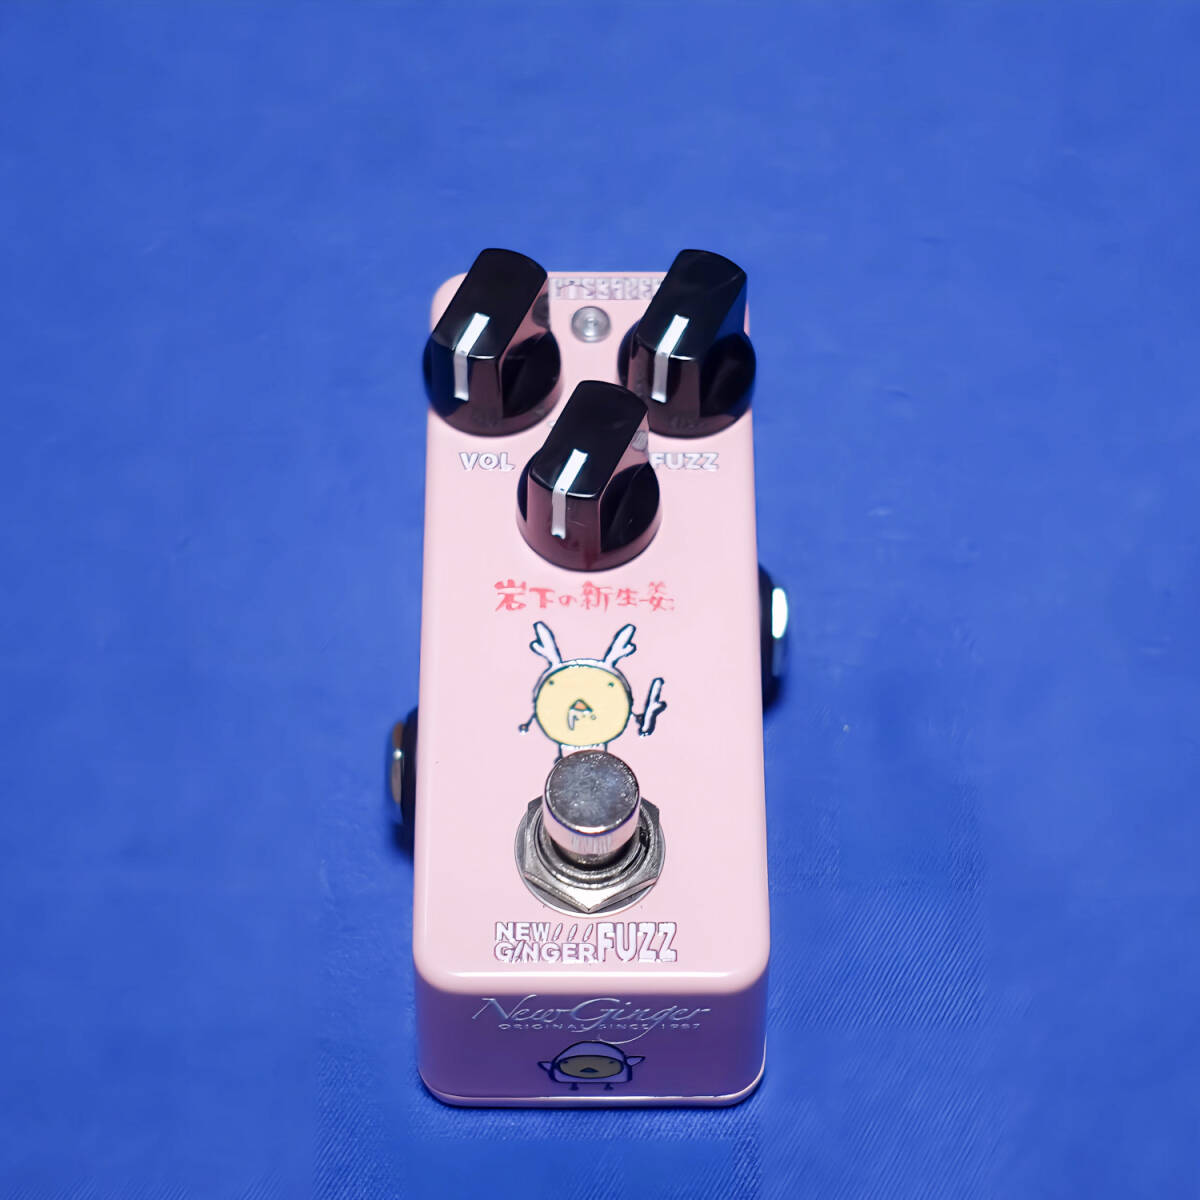 !! Effects Bakery NEW GINGER FUZZ rock under. rebirth . collaboration model beautiful goods free shipping!!